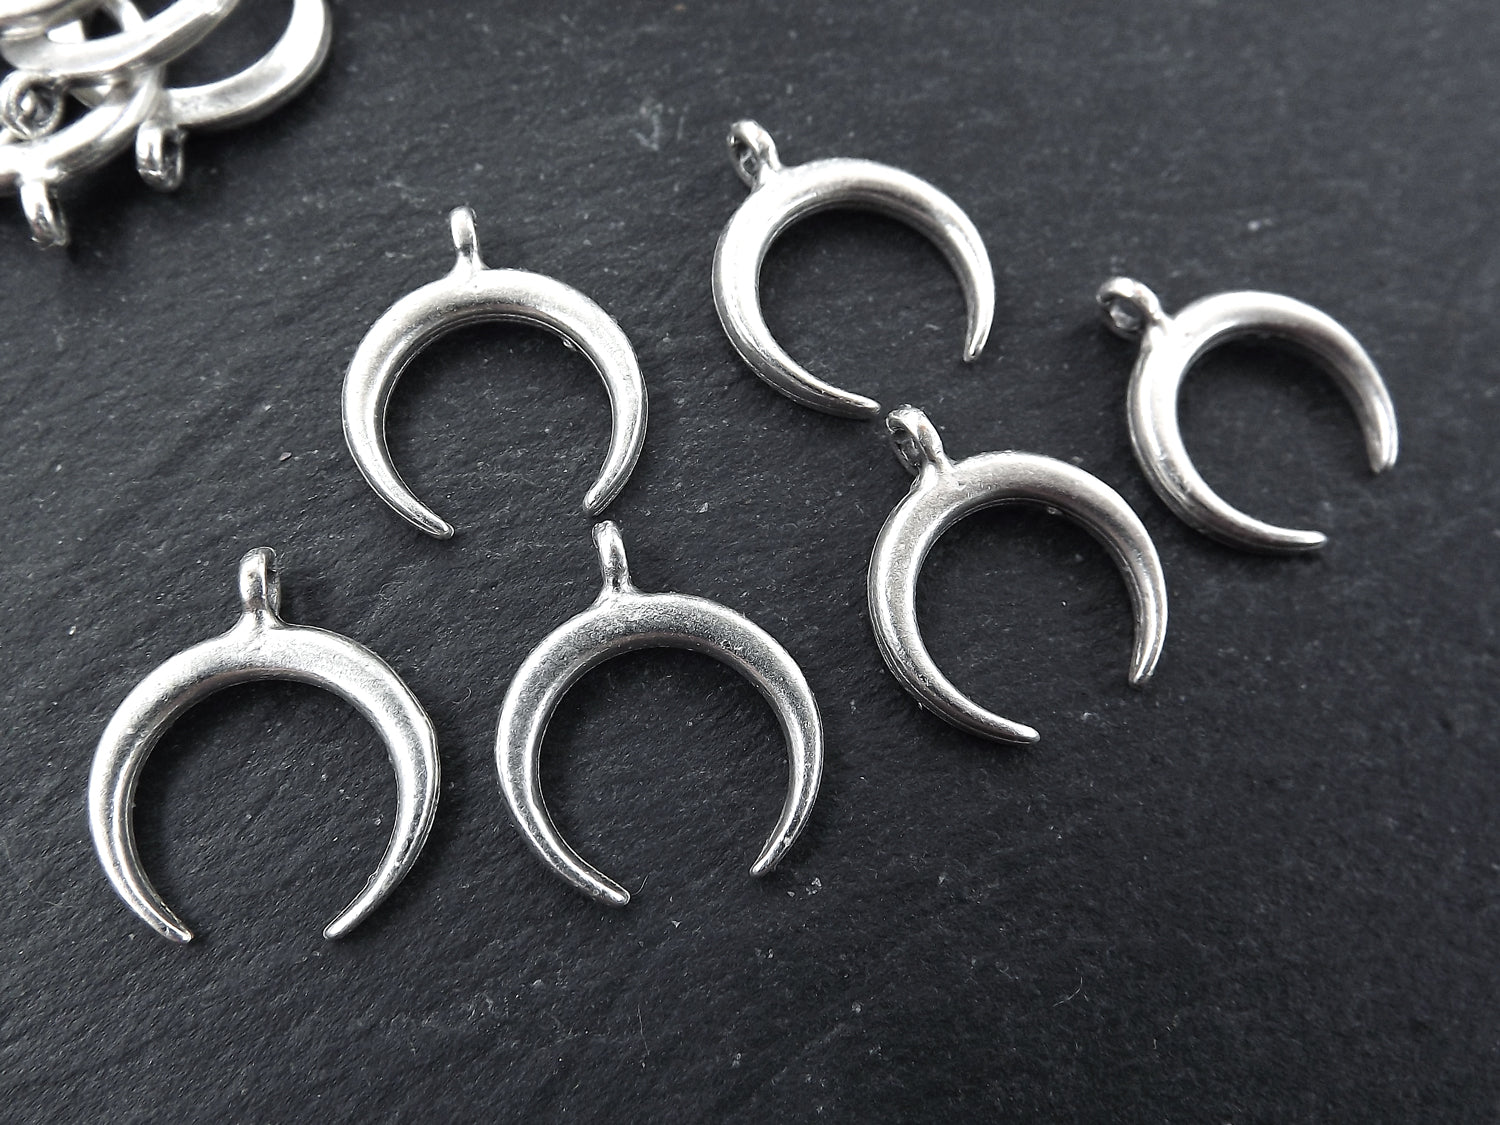 6 Small Crescent Pendant Charms Tribal Double Horn Charms Antique Matte Silver Plated Turkish Jewelry Making Supplies Findings Components